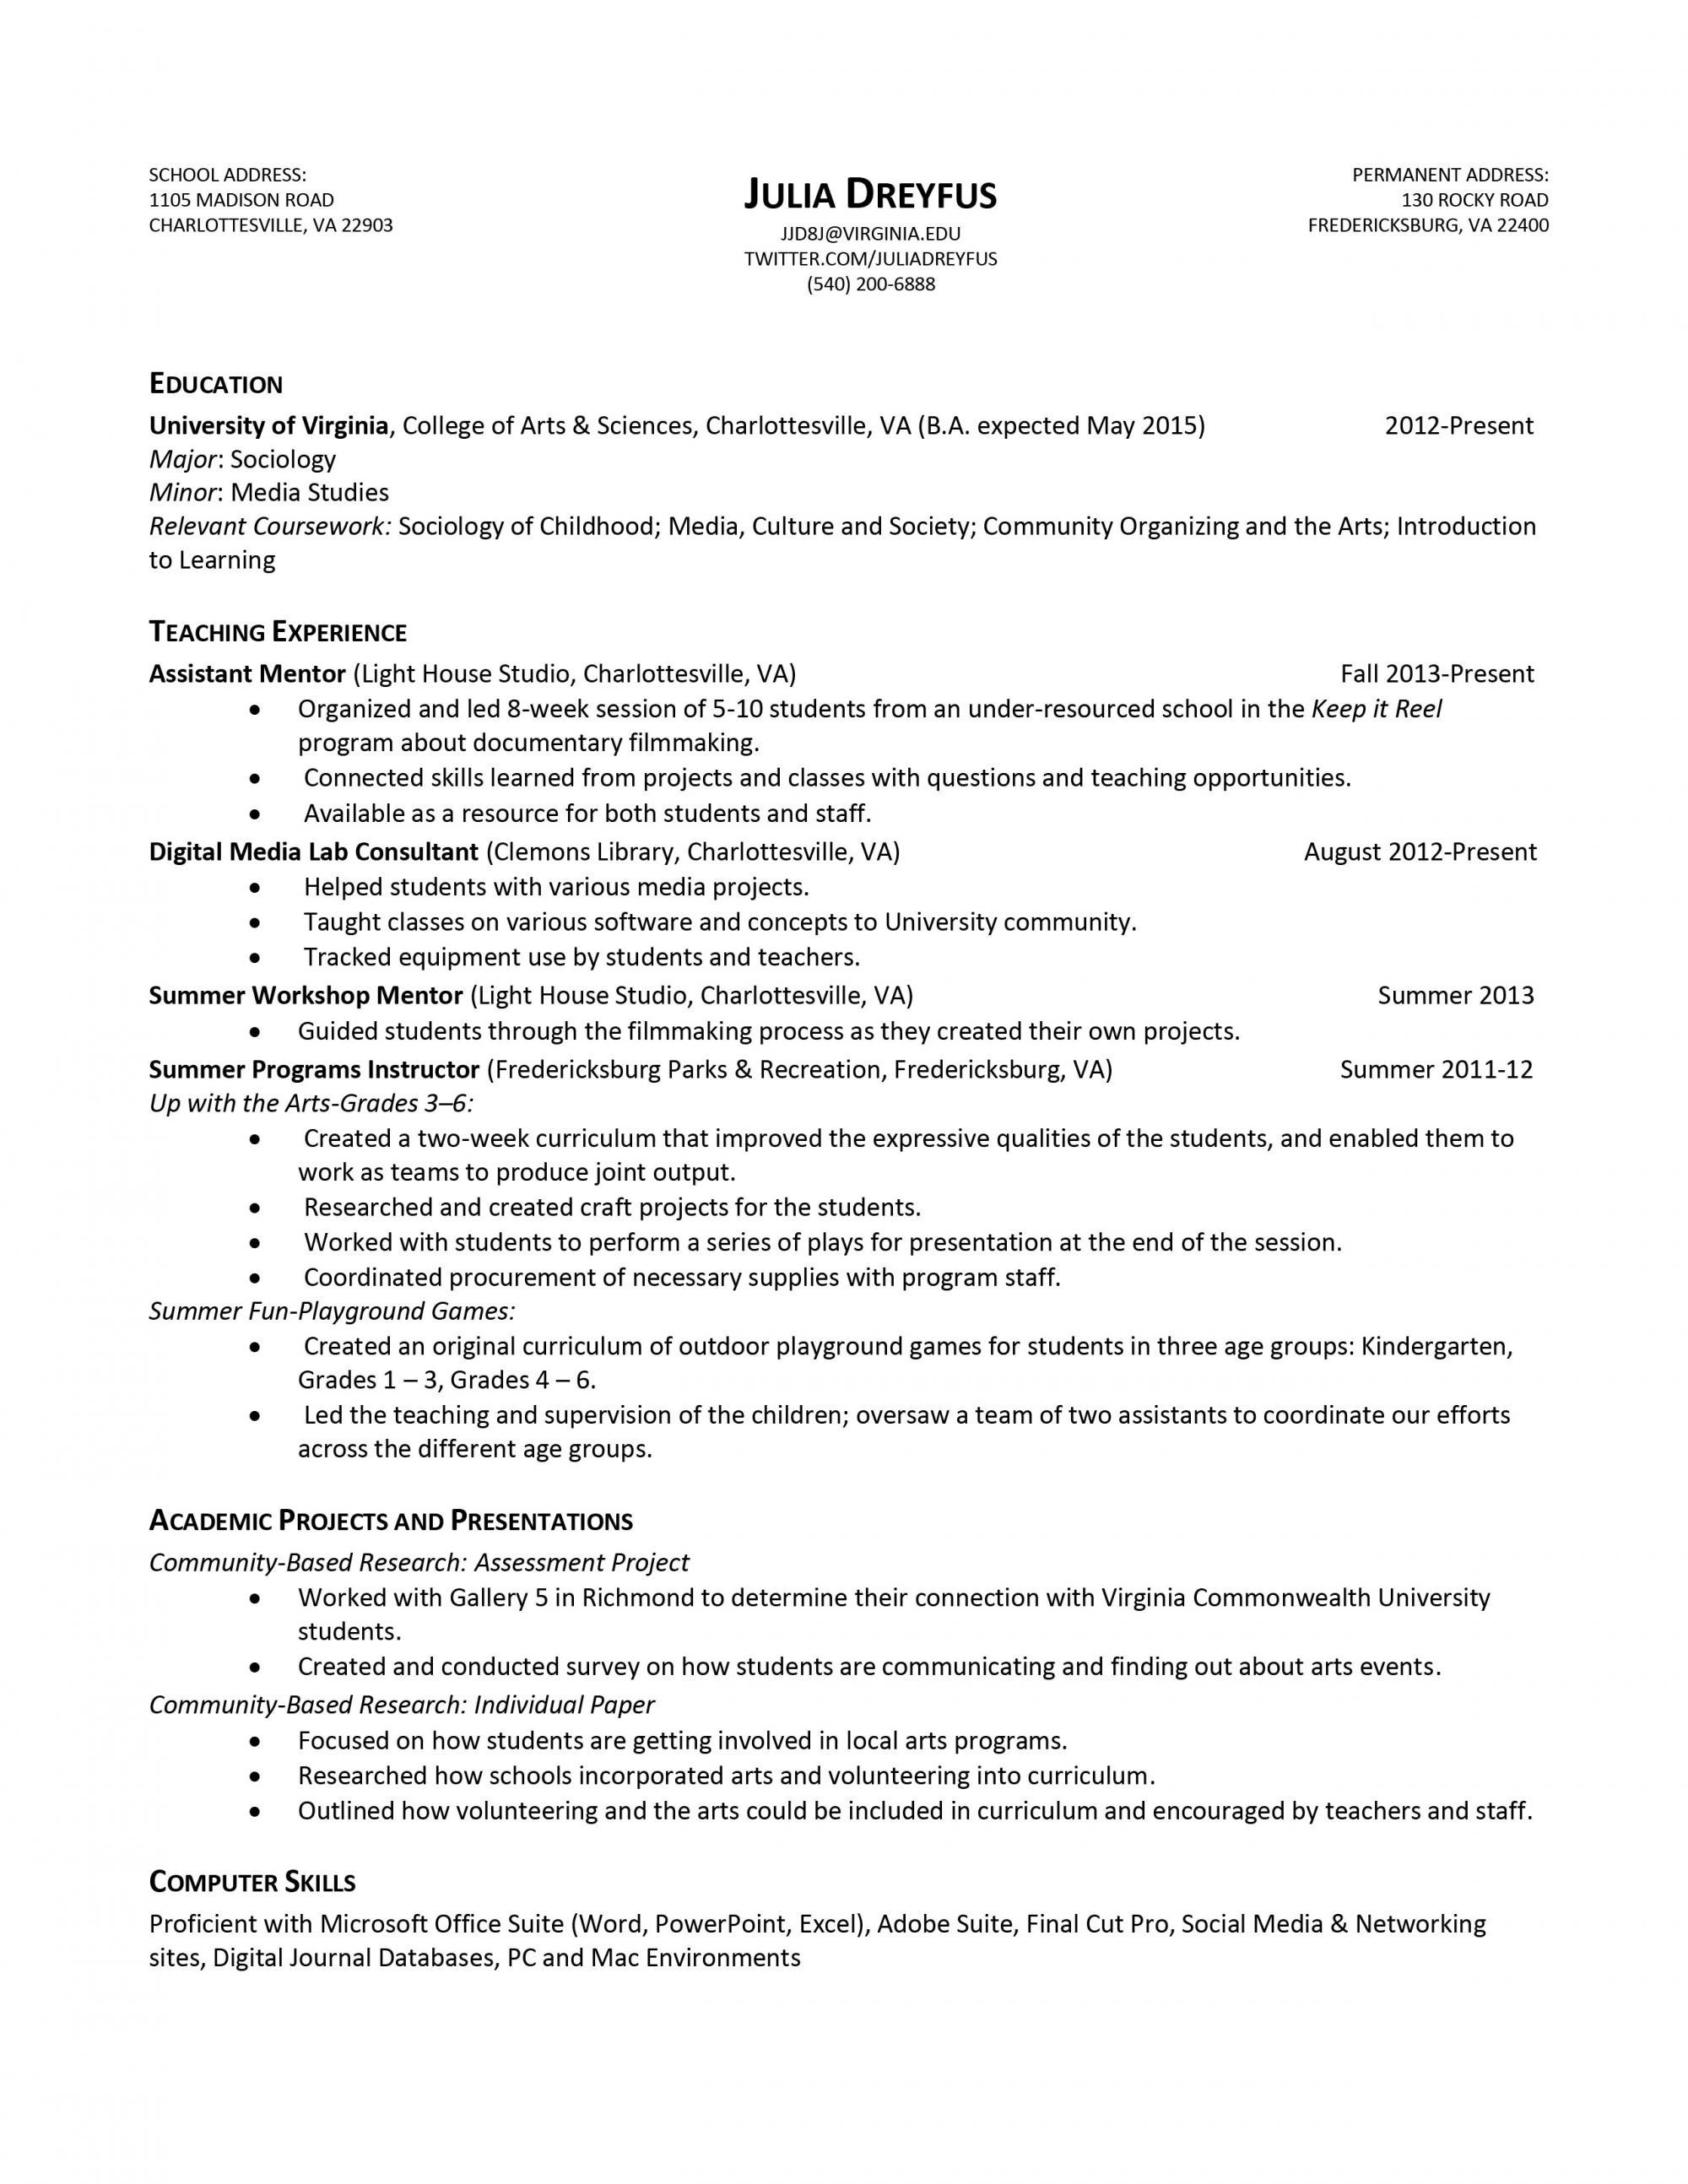 How Long Should A Resume Be How Long Should A Federal Resume Be Valid Guide Luxury Government Template Best Of 5 how long should a resume be|wikiresume.com